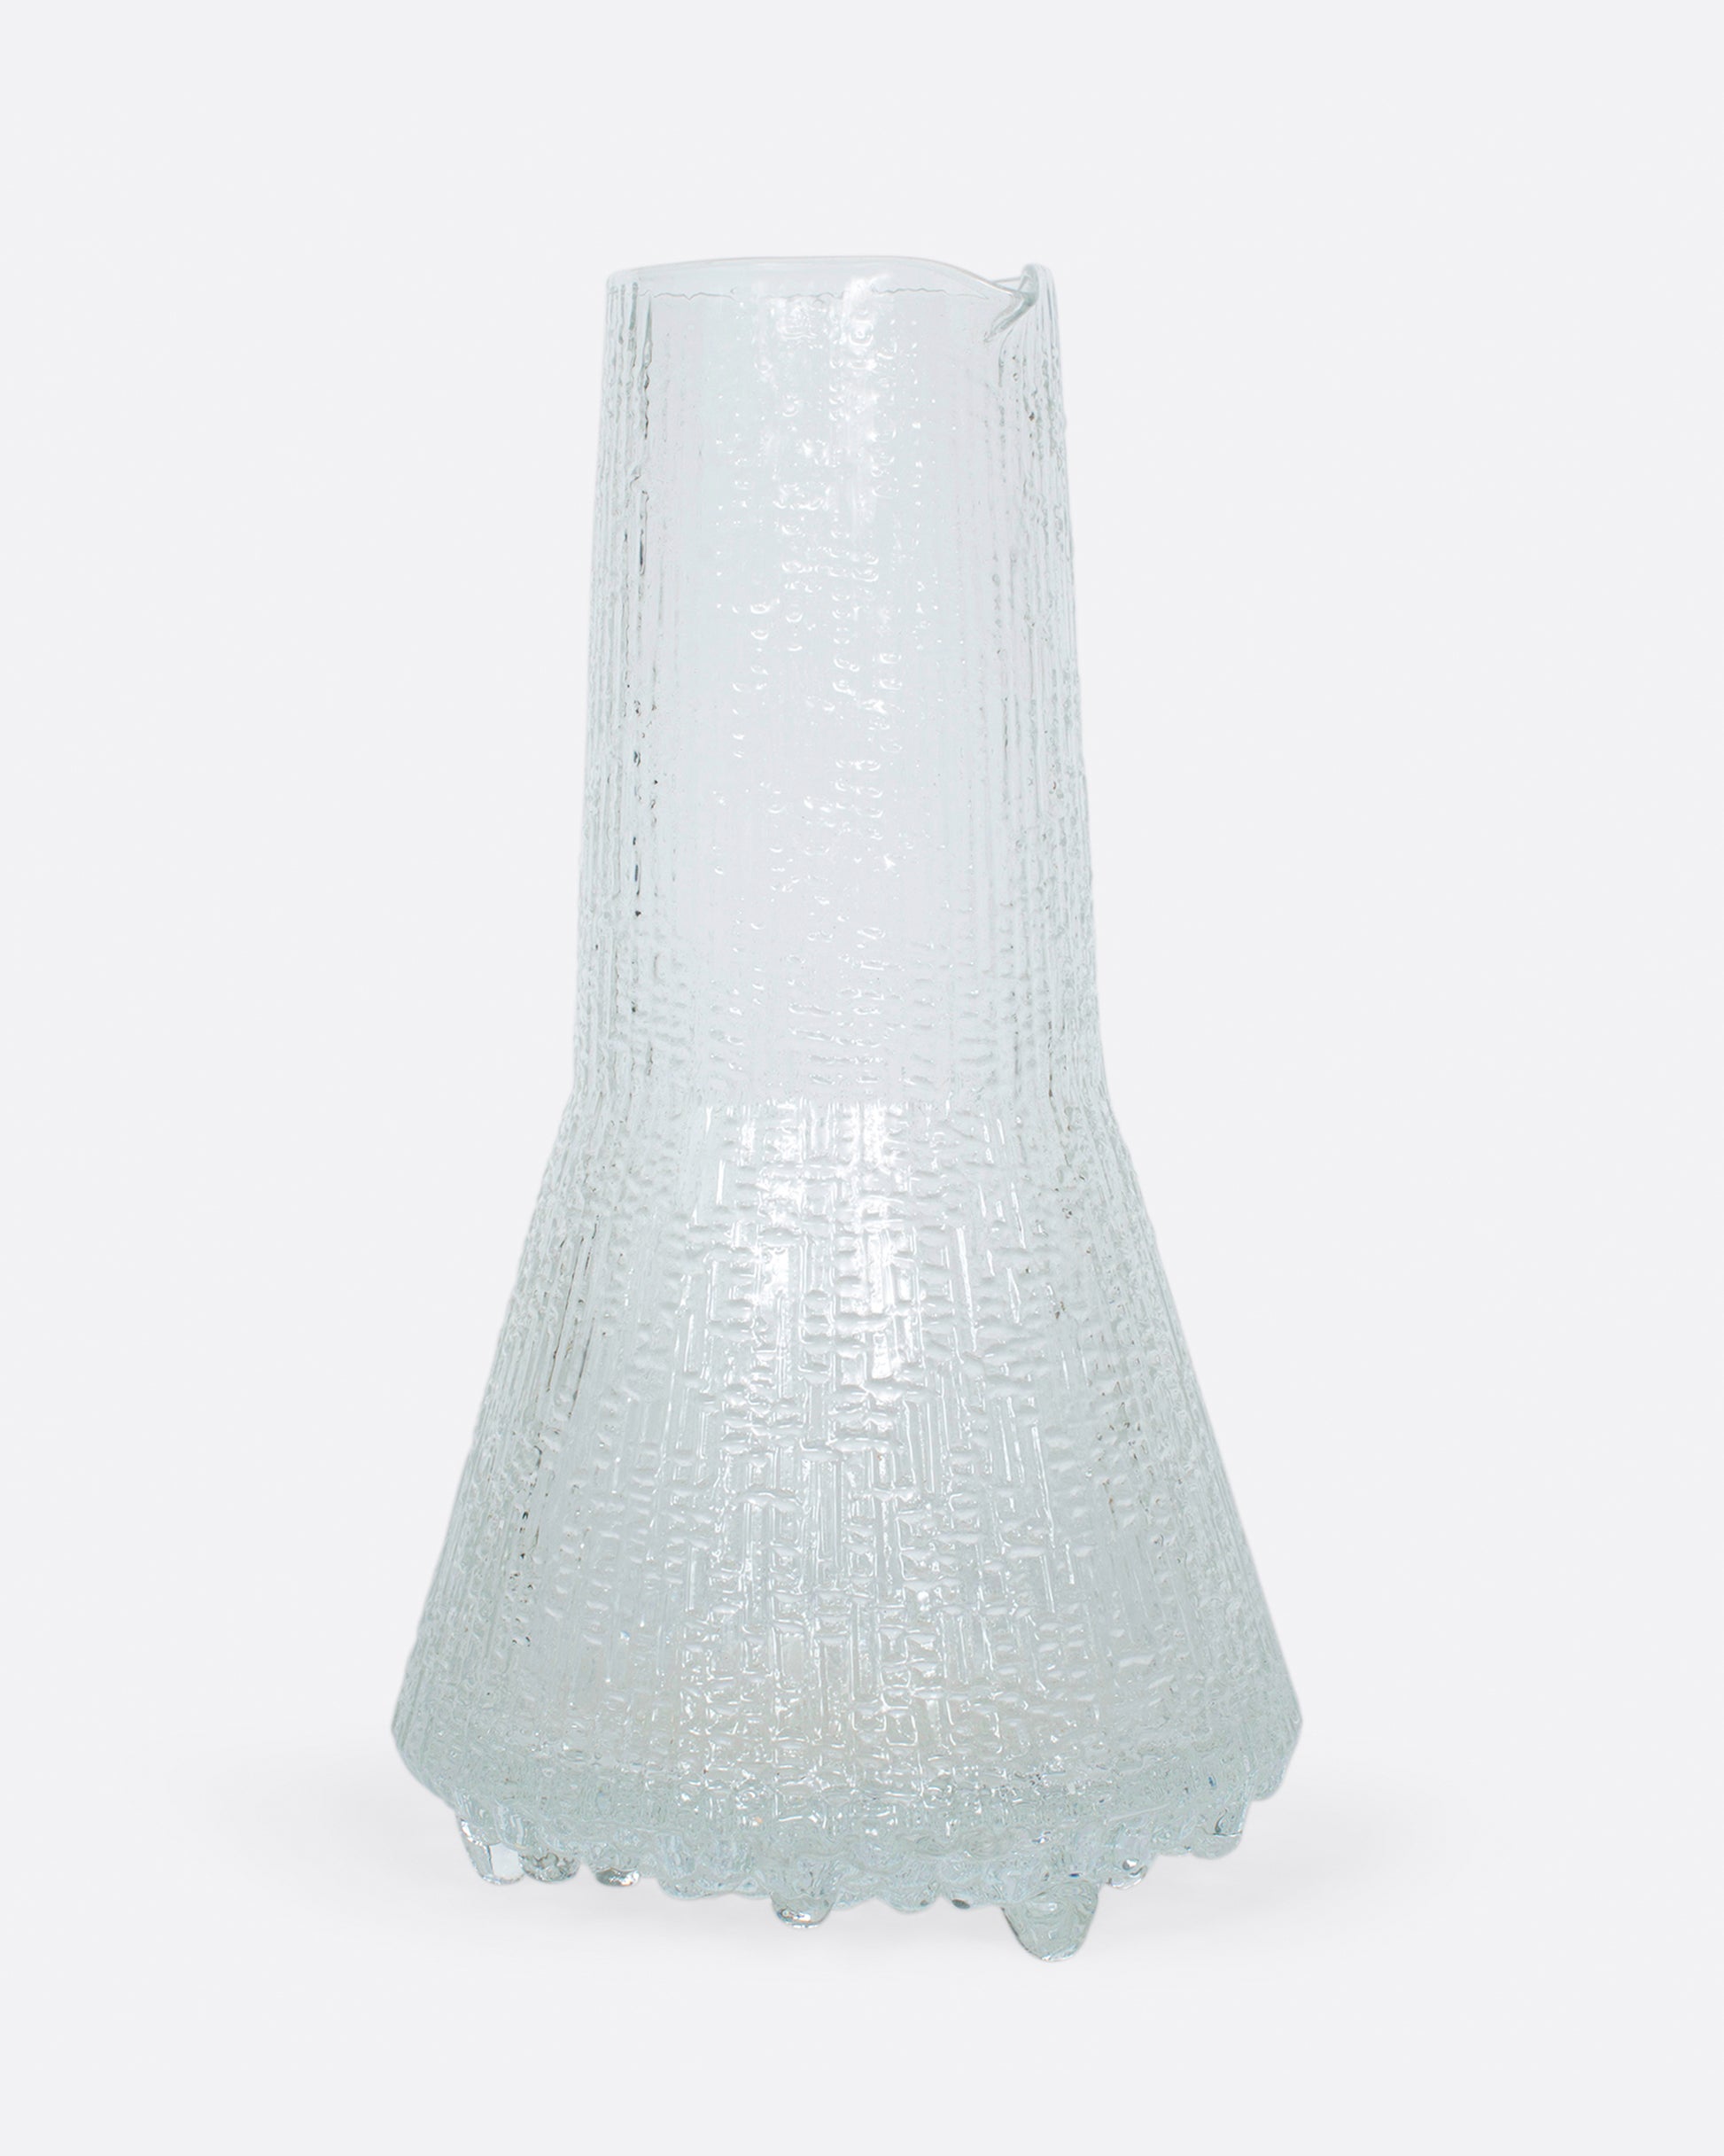 This mid-century, beaker-like piece can be used as a carafe or a vase.